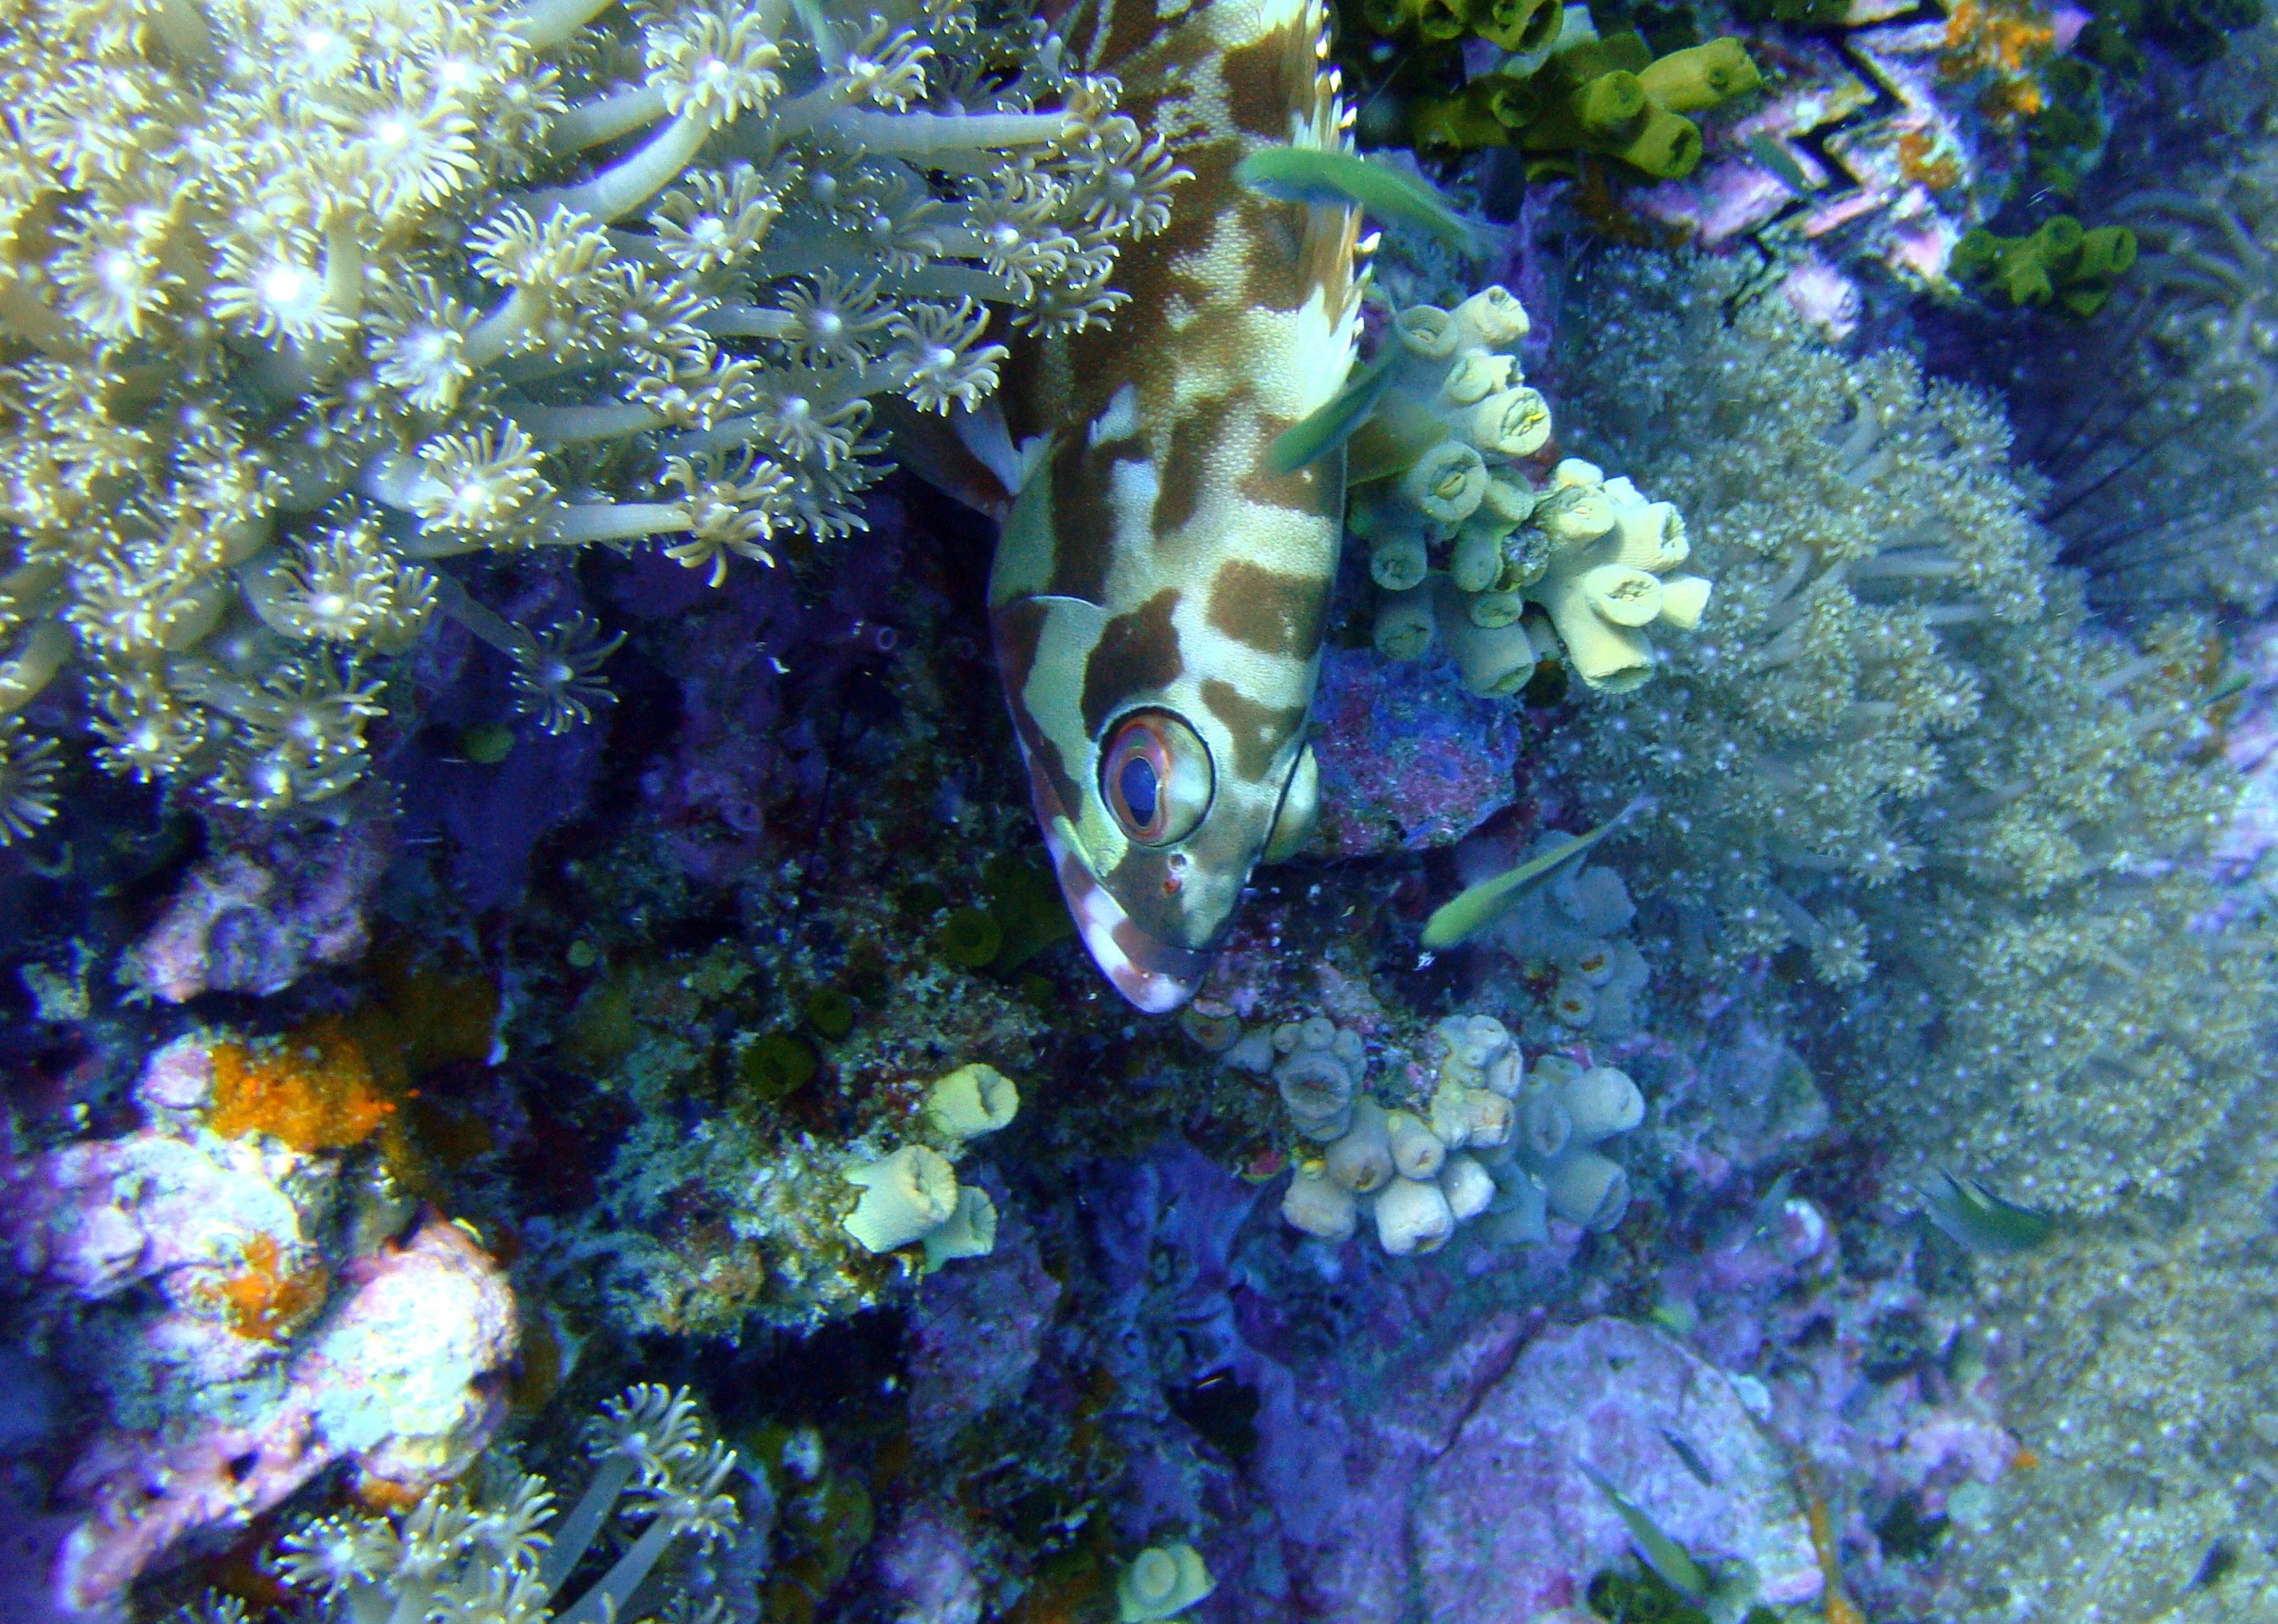 brown and beige short fin fish